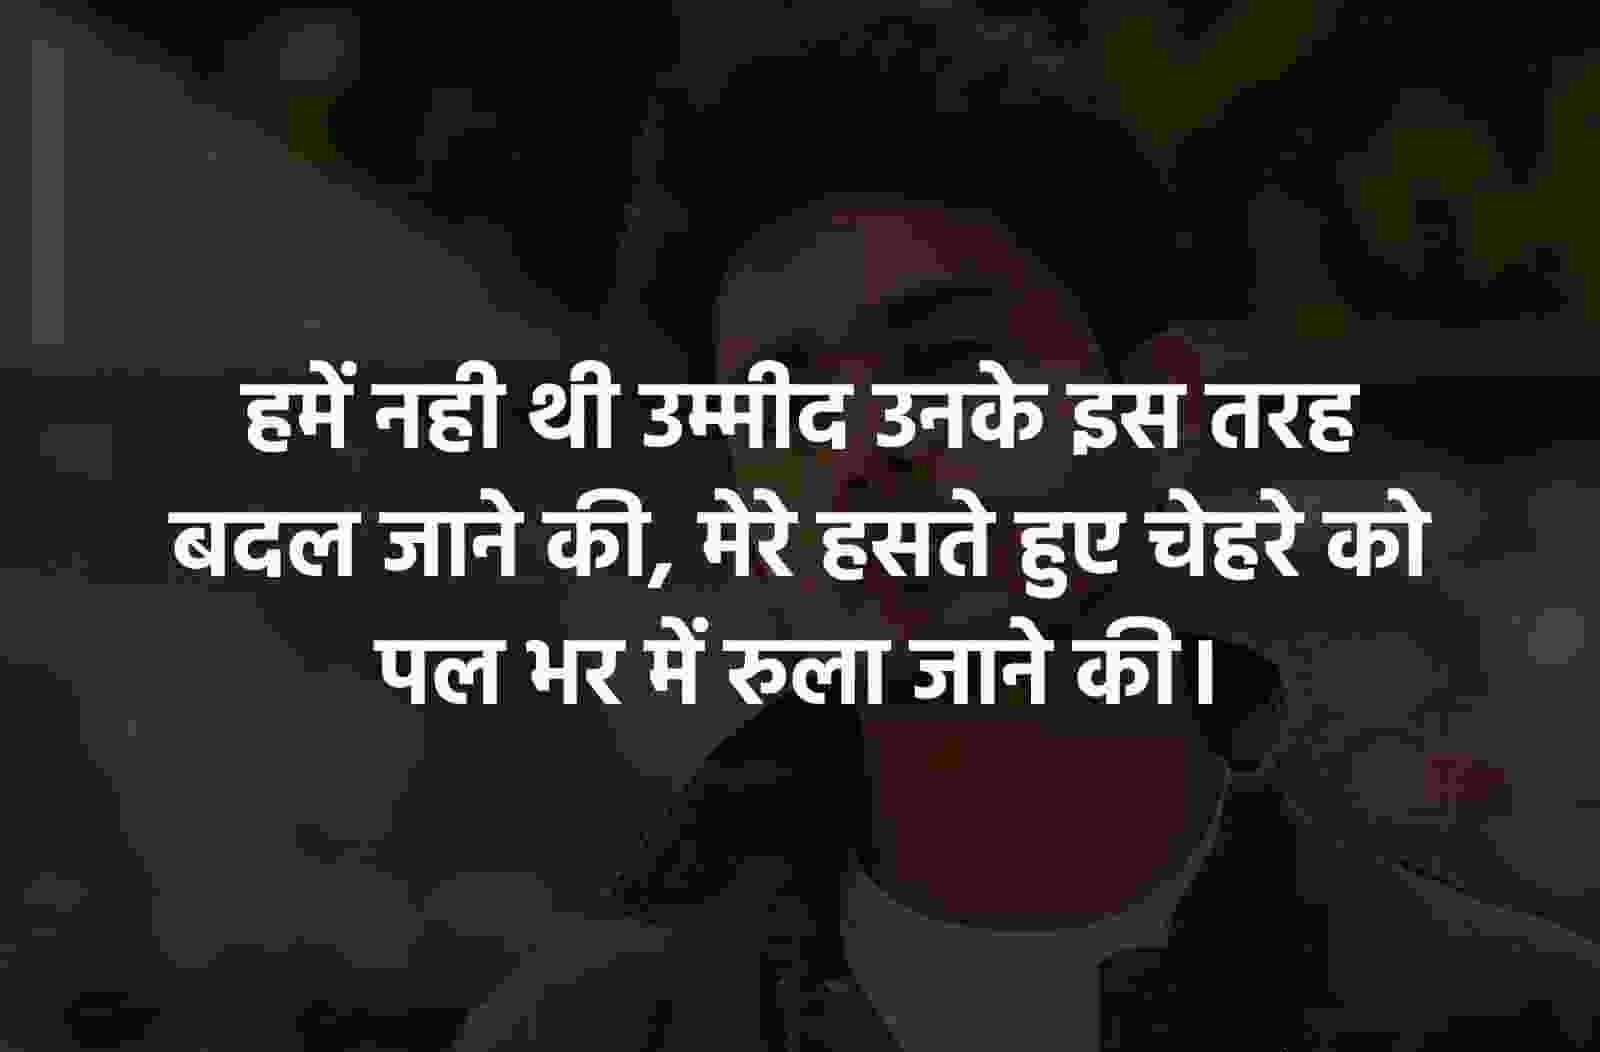 Sad life Quotes in Hindi and Hindi poetry - tfipost.in